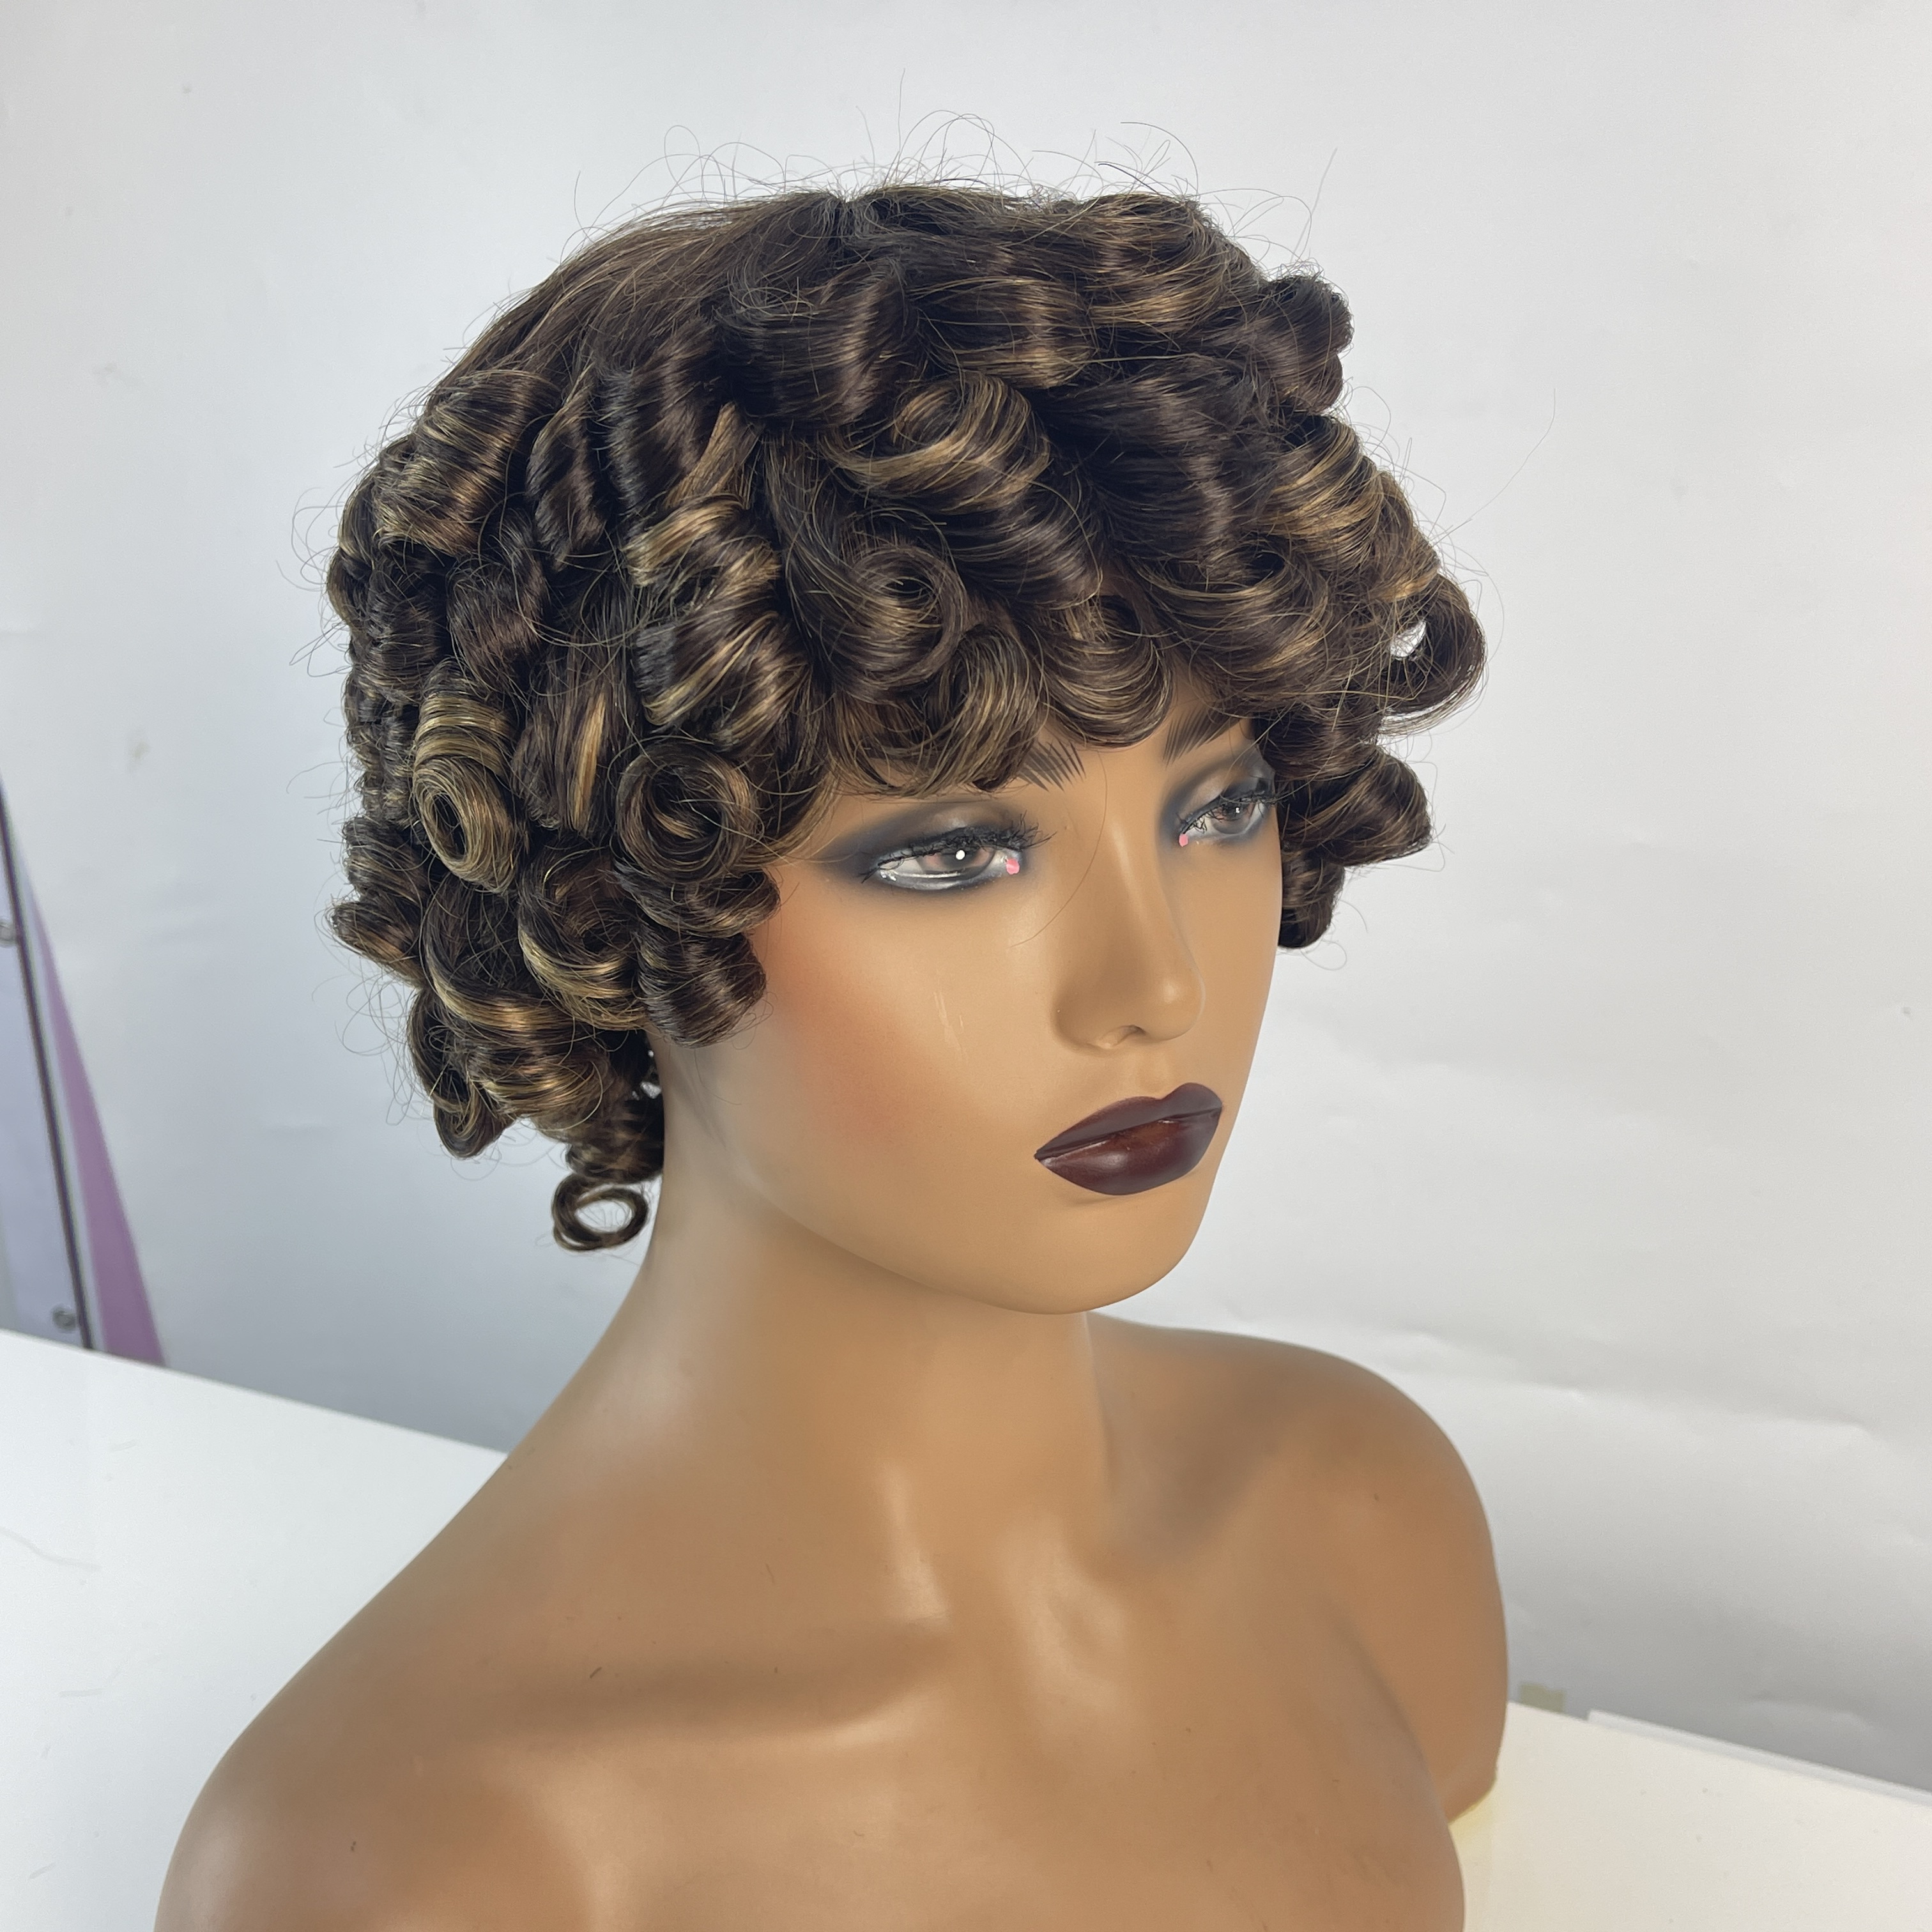 Short Curly Wig for Black Women with Bangs Bouncy Fluffy Kinky Curly Human Hair 2 Tone Ombre Darkest Brown Short Curly Afro Wig